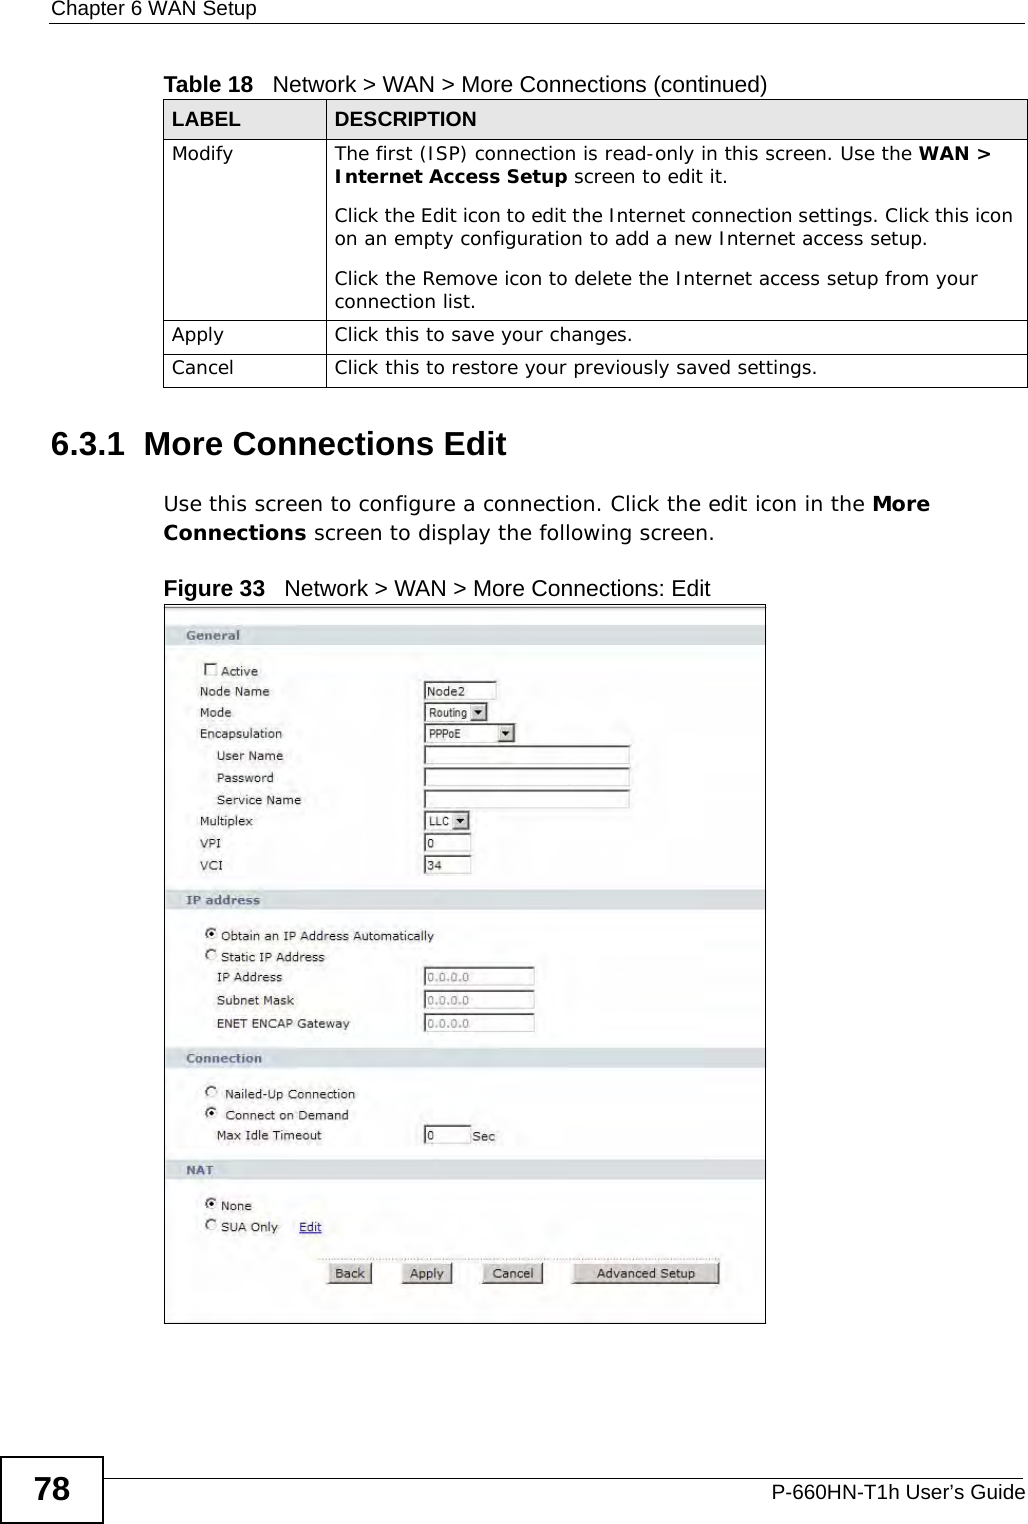 Chapter 6 WAN SetupP-660HN-T1h User’s Guide786.3.1  More Connections EditUse this screen to configure a connection. Click the edit icon in the More Connections screen to display the following screen.Figure 33   Network &gt; WAN &gt; More Connections: EditModify The first (ISP) connection is read-only in this screen. Use the WAN &gt; Internet Access Setup screen to edit it.Click the Edit icon to edit the Internet connection settings. Click this icon on an empty configuration to add a new Internet access setup.Click the Remove icon to delete the Internet access setup from your connection list.Apply Click this to save your changes. Cancel Click this to restore your previously saved settings.Table 18   Network &gt; WAN &gt; More Connections (continued)LABEL DESCRIPTION